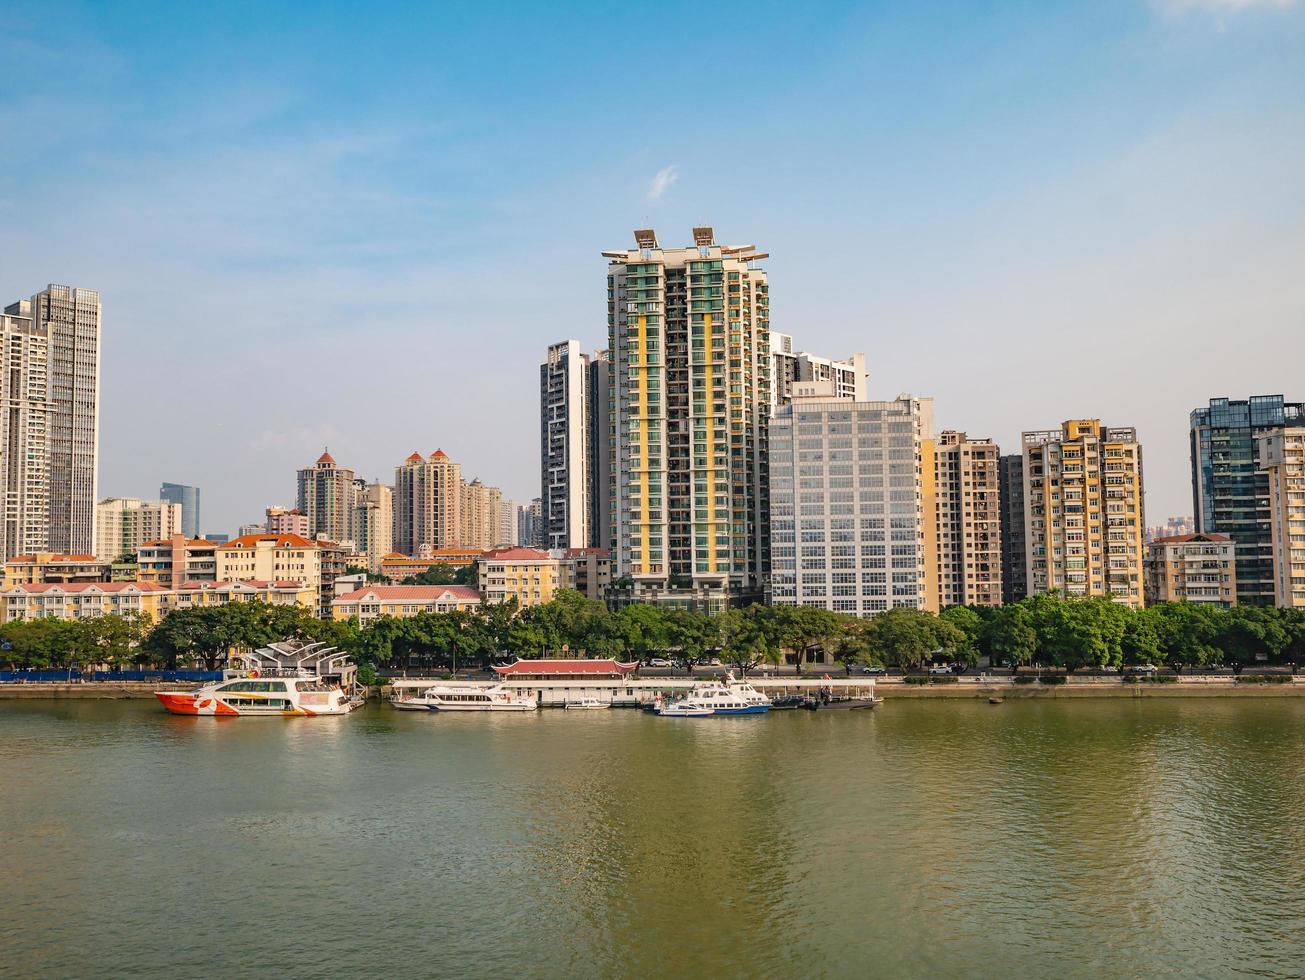 Cityscape of Guangzhou city with pearl river.Guangzhou also known as Canton and formerly romanized as Kwangchow or Kwong Chow, is the capital and most populous city of the province of Guangdong photo